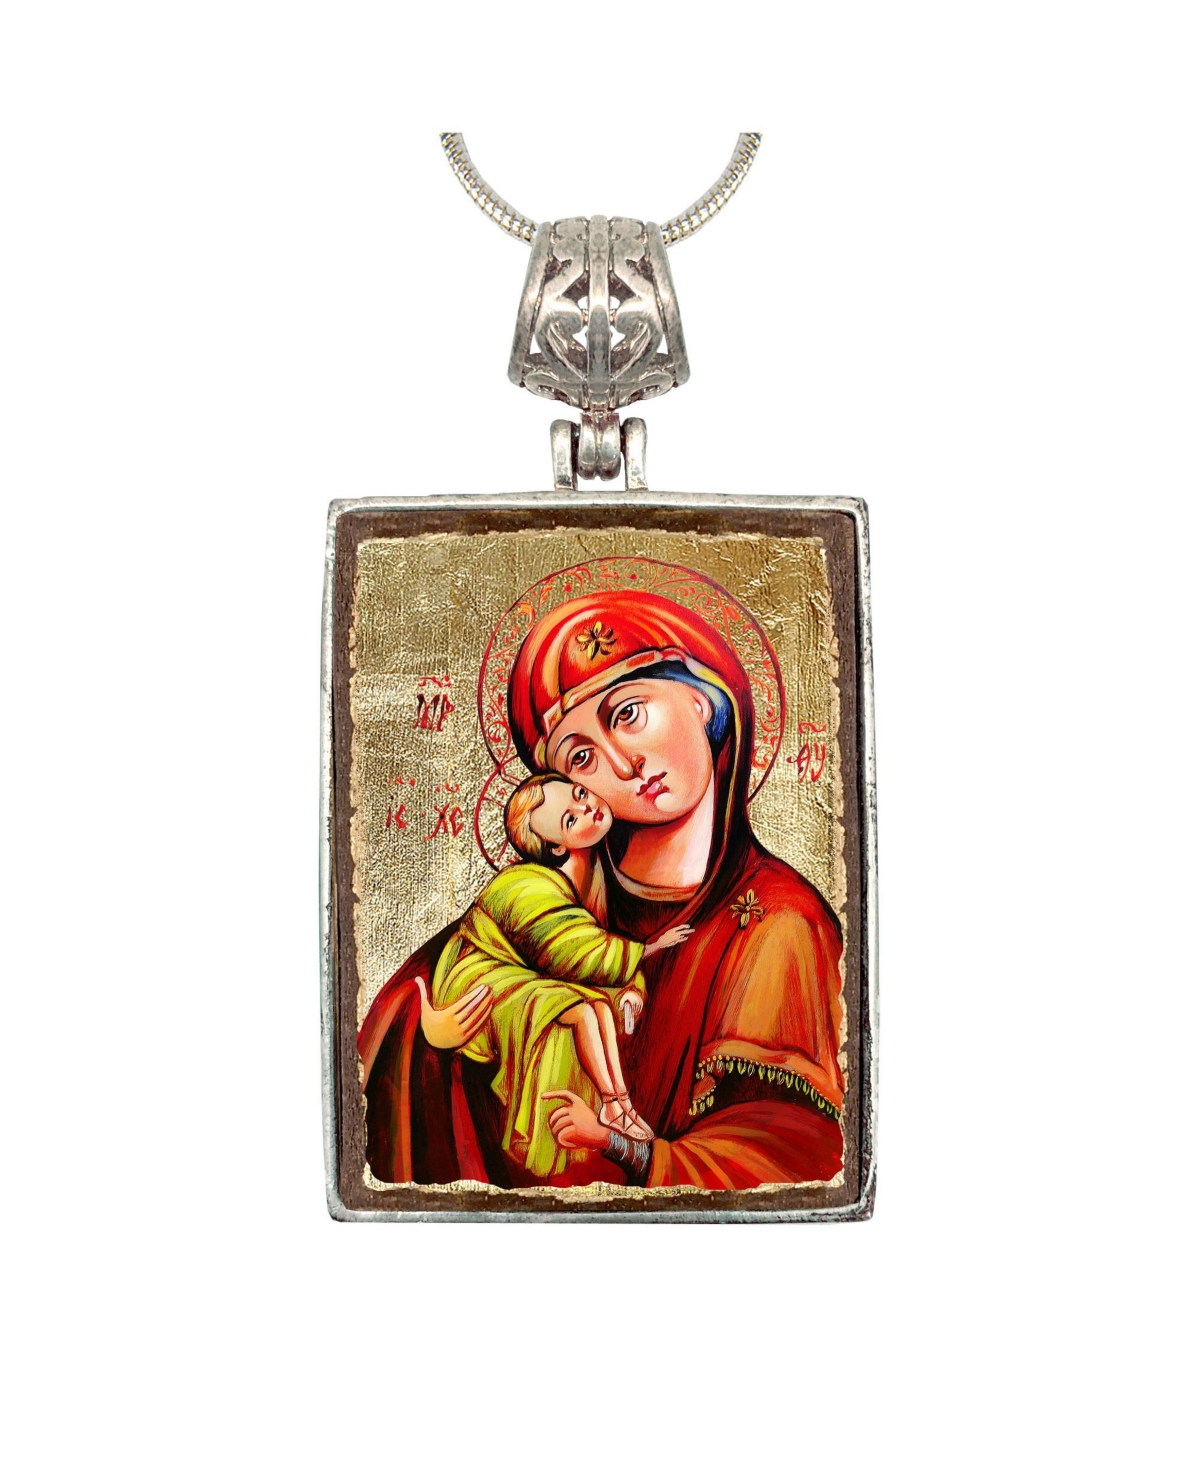 Virgin Mary Religious Holiday Jewelry Necklace Monastery Icons - Multi Color